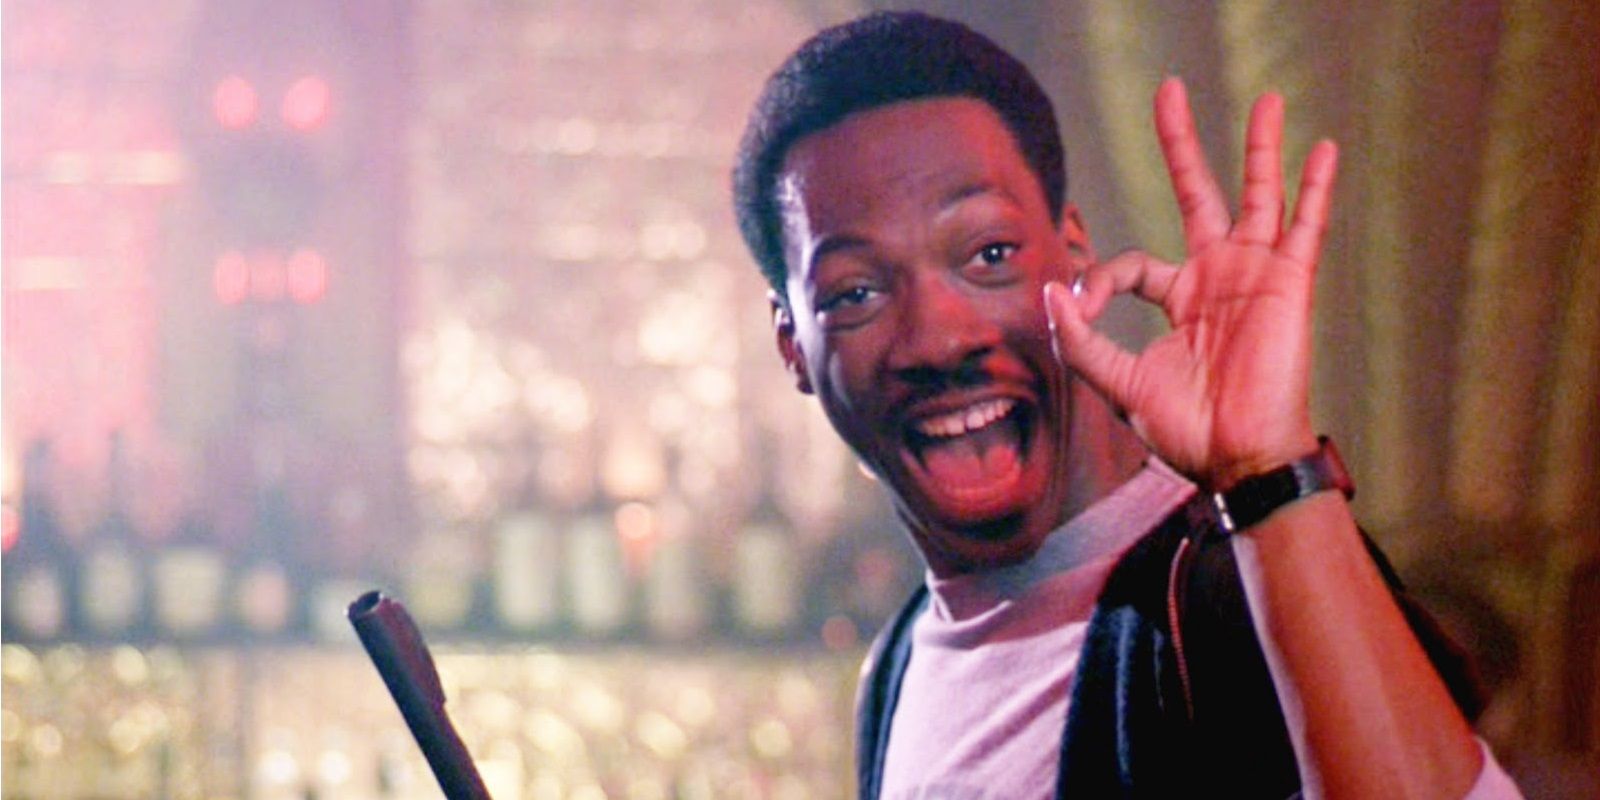 10 Buddy Cop Movies To Watch If You Like Lethal Weapon